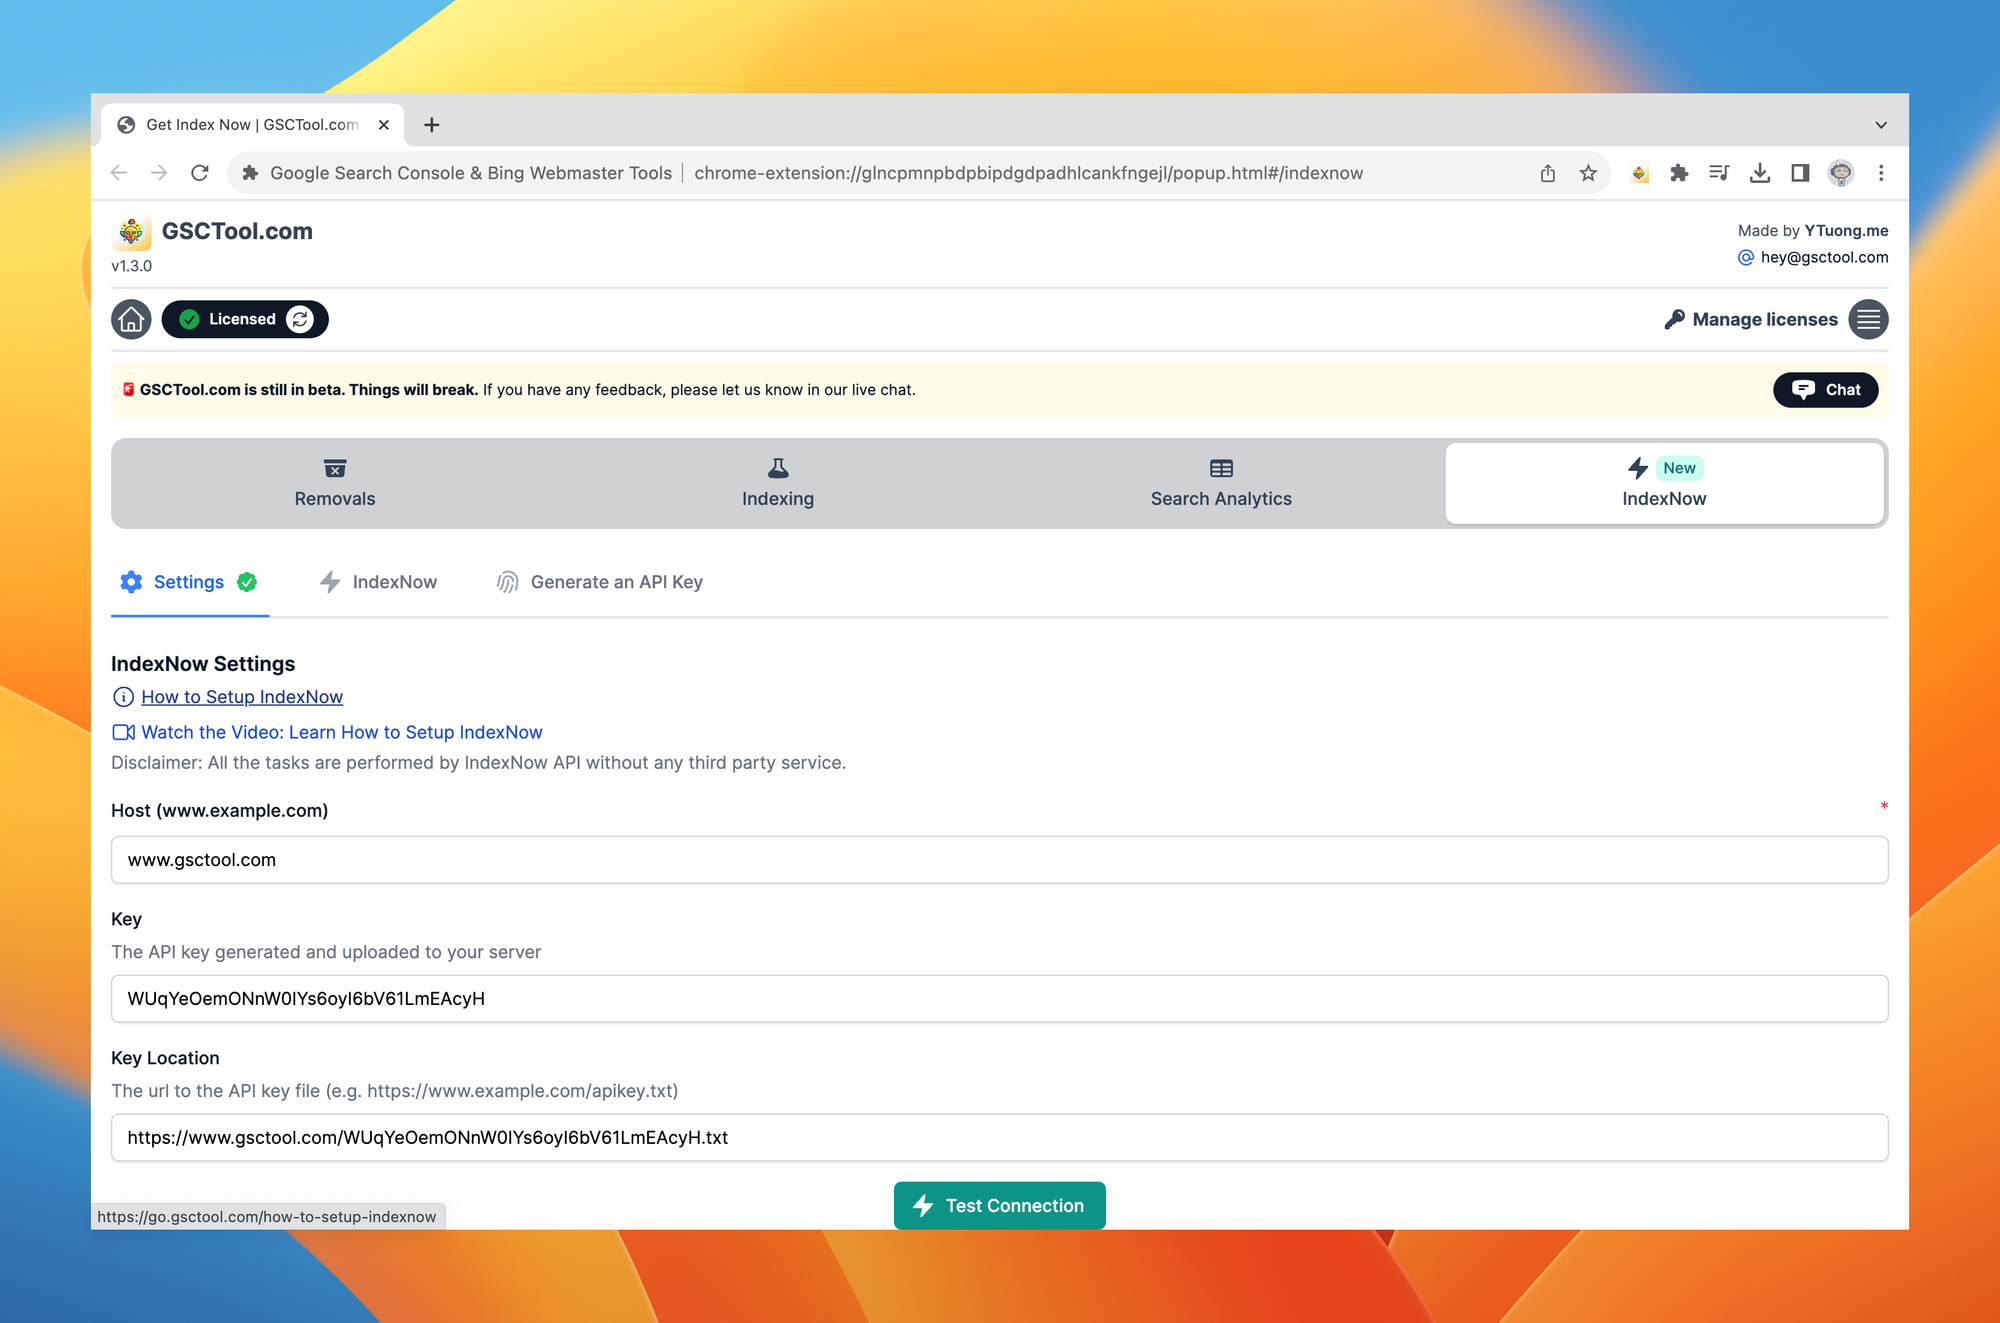 Configure the IndexNow API for the Chrome extension